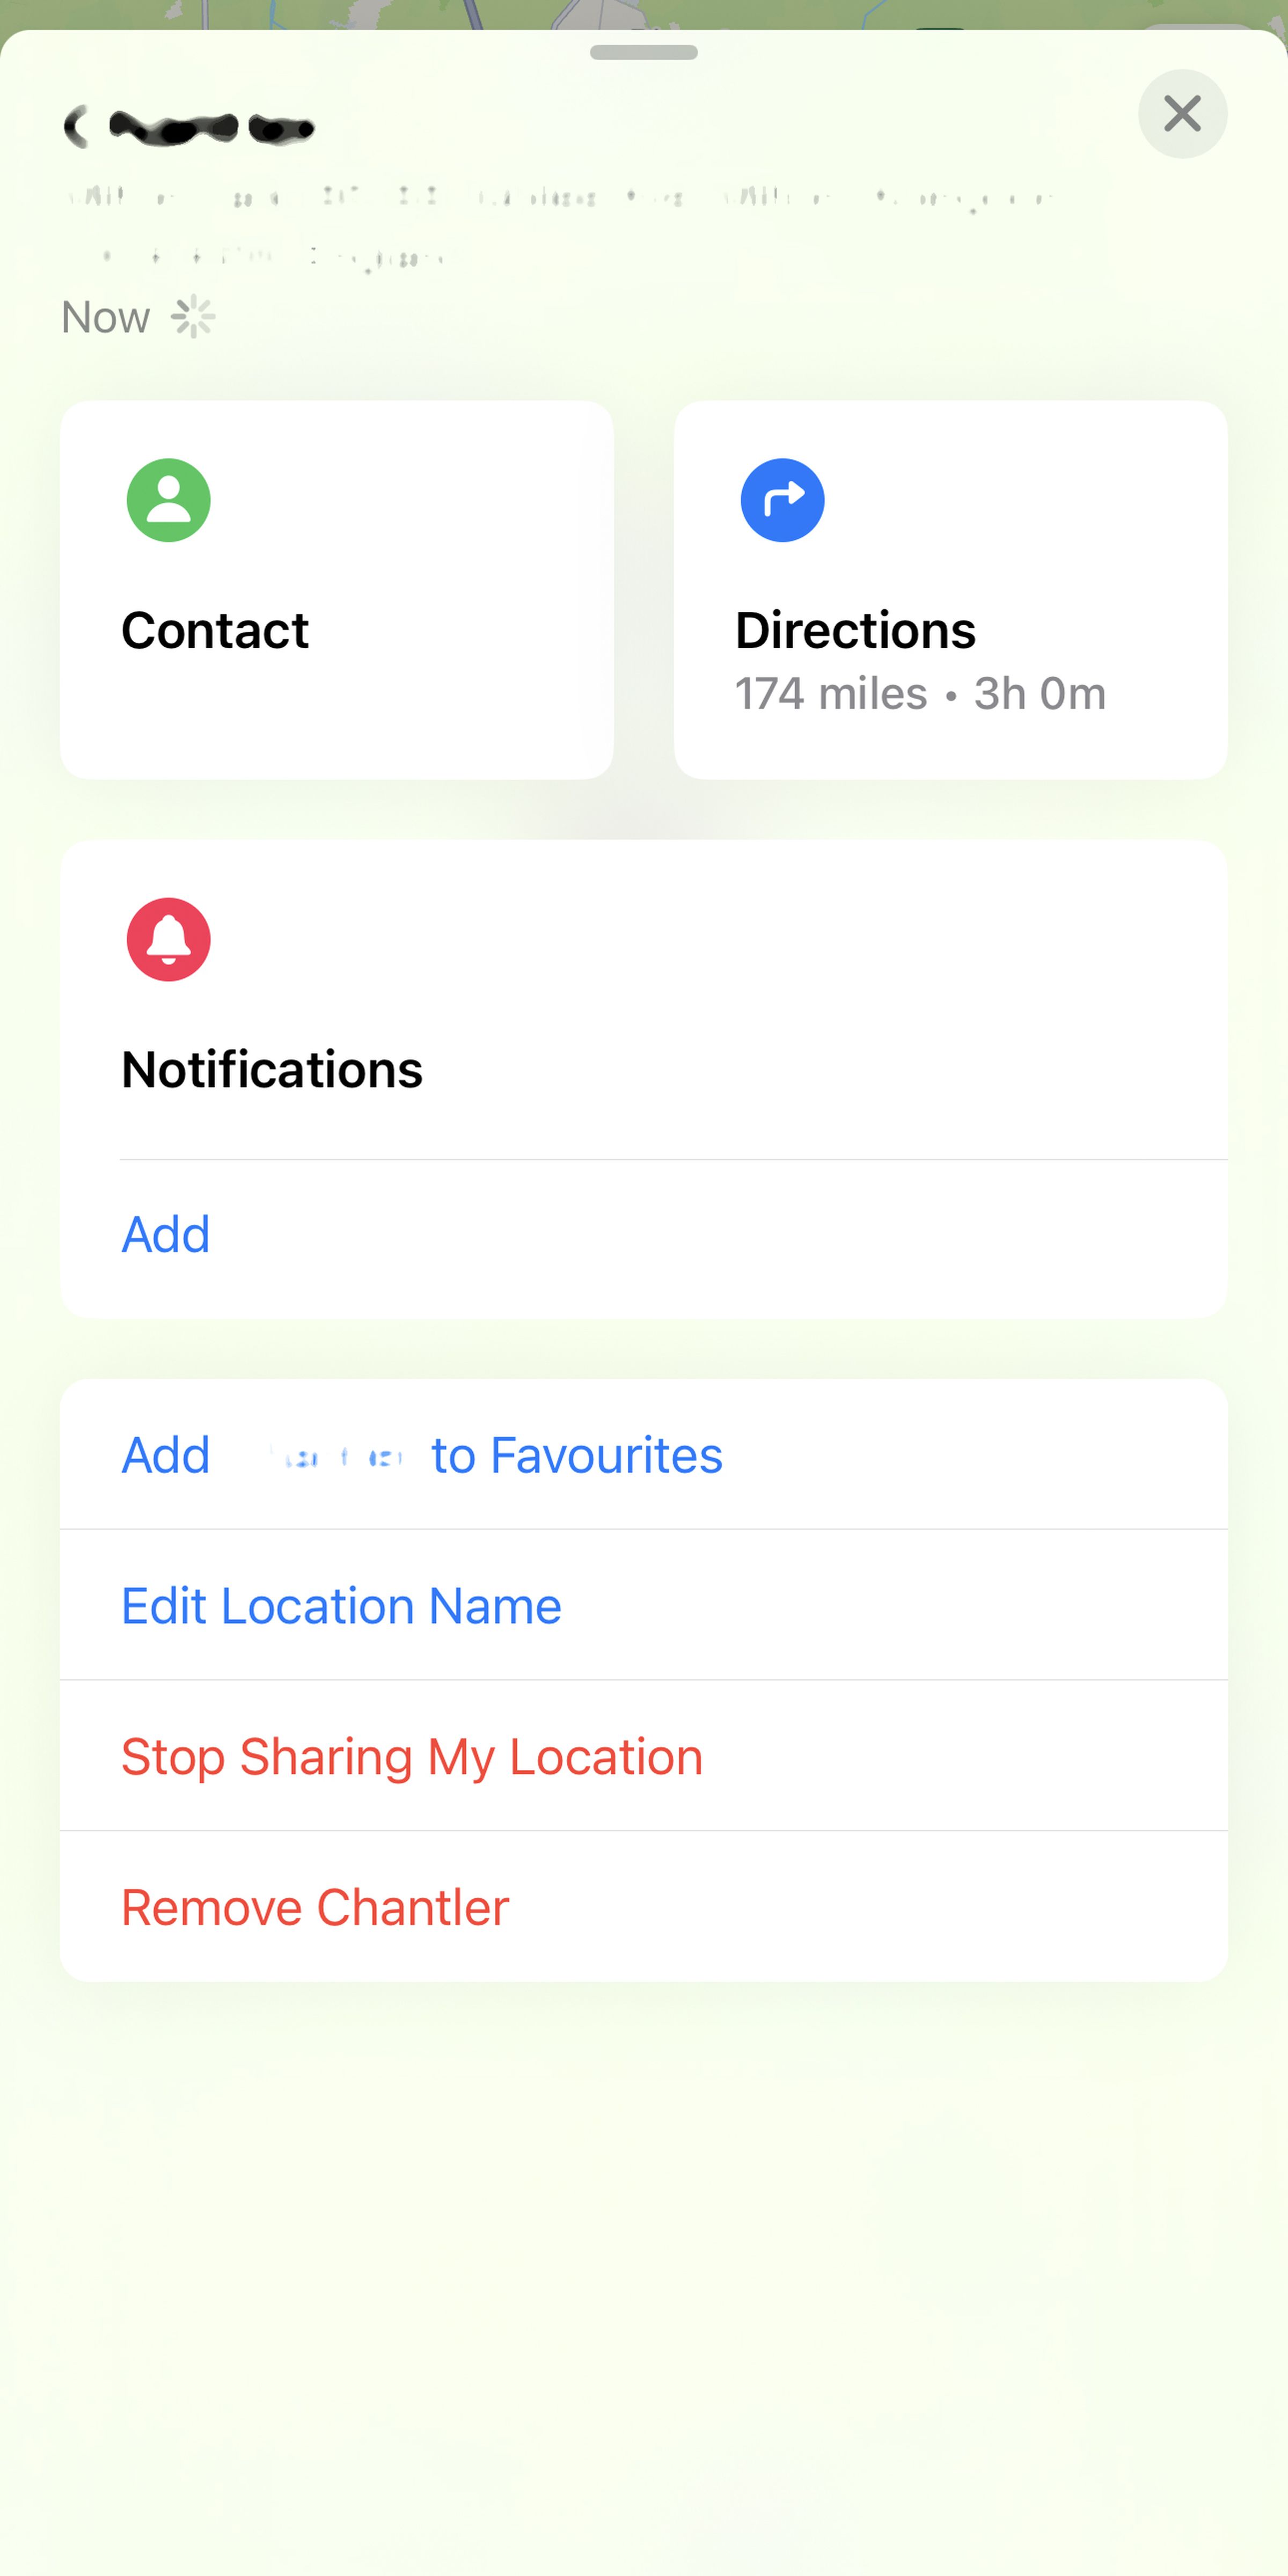 Mobile screen with three buttons: Contact, Directions, Notifications.